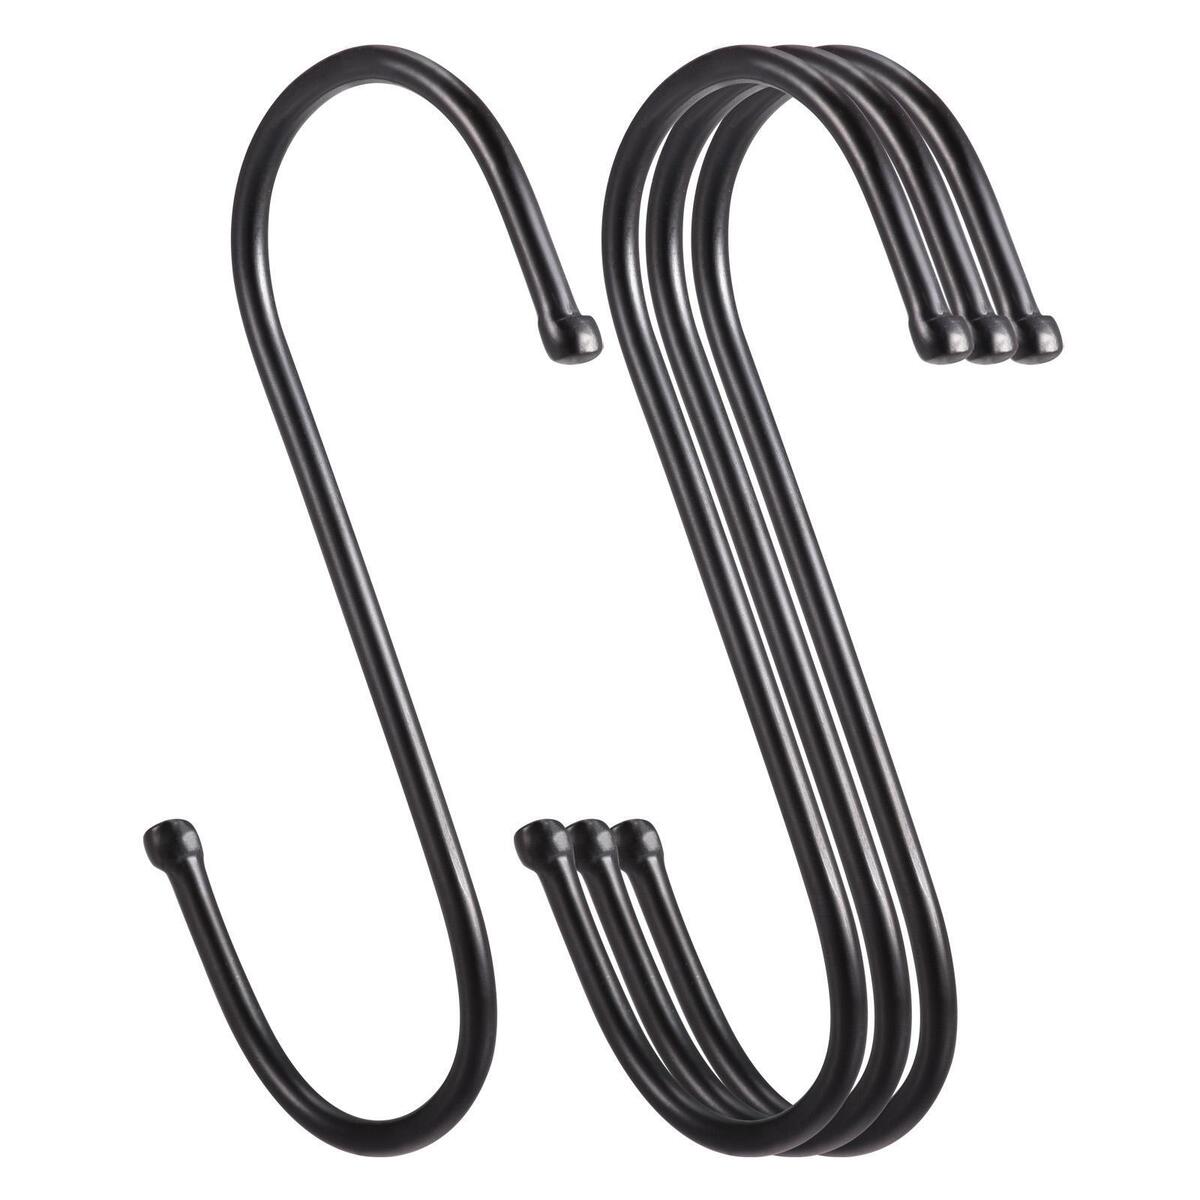 S Hooks 3.54inches Stainless Steel Hanger for Hanging Black 4Pack